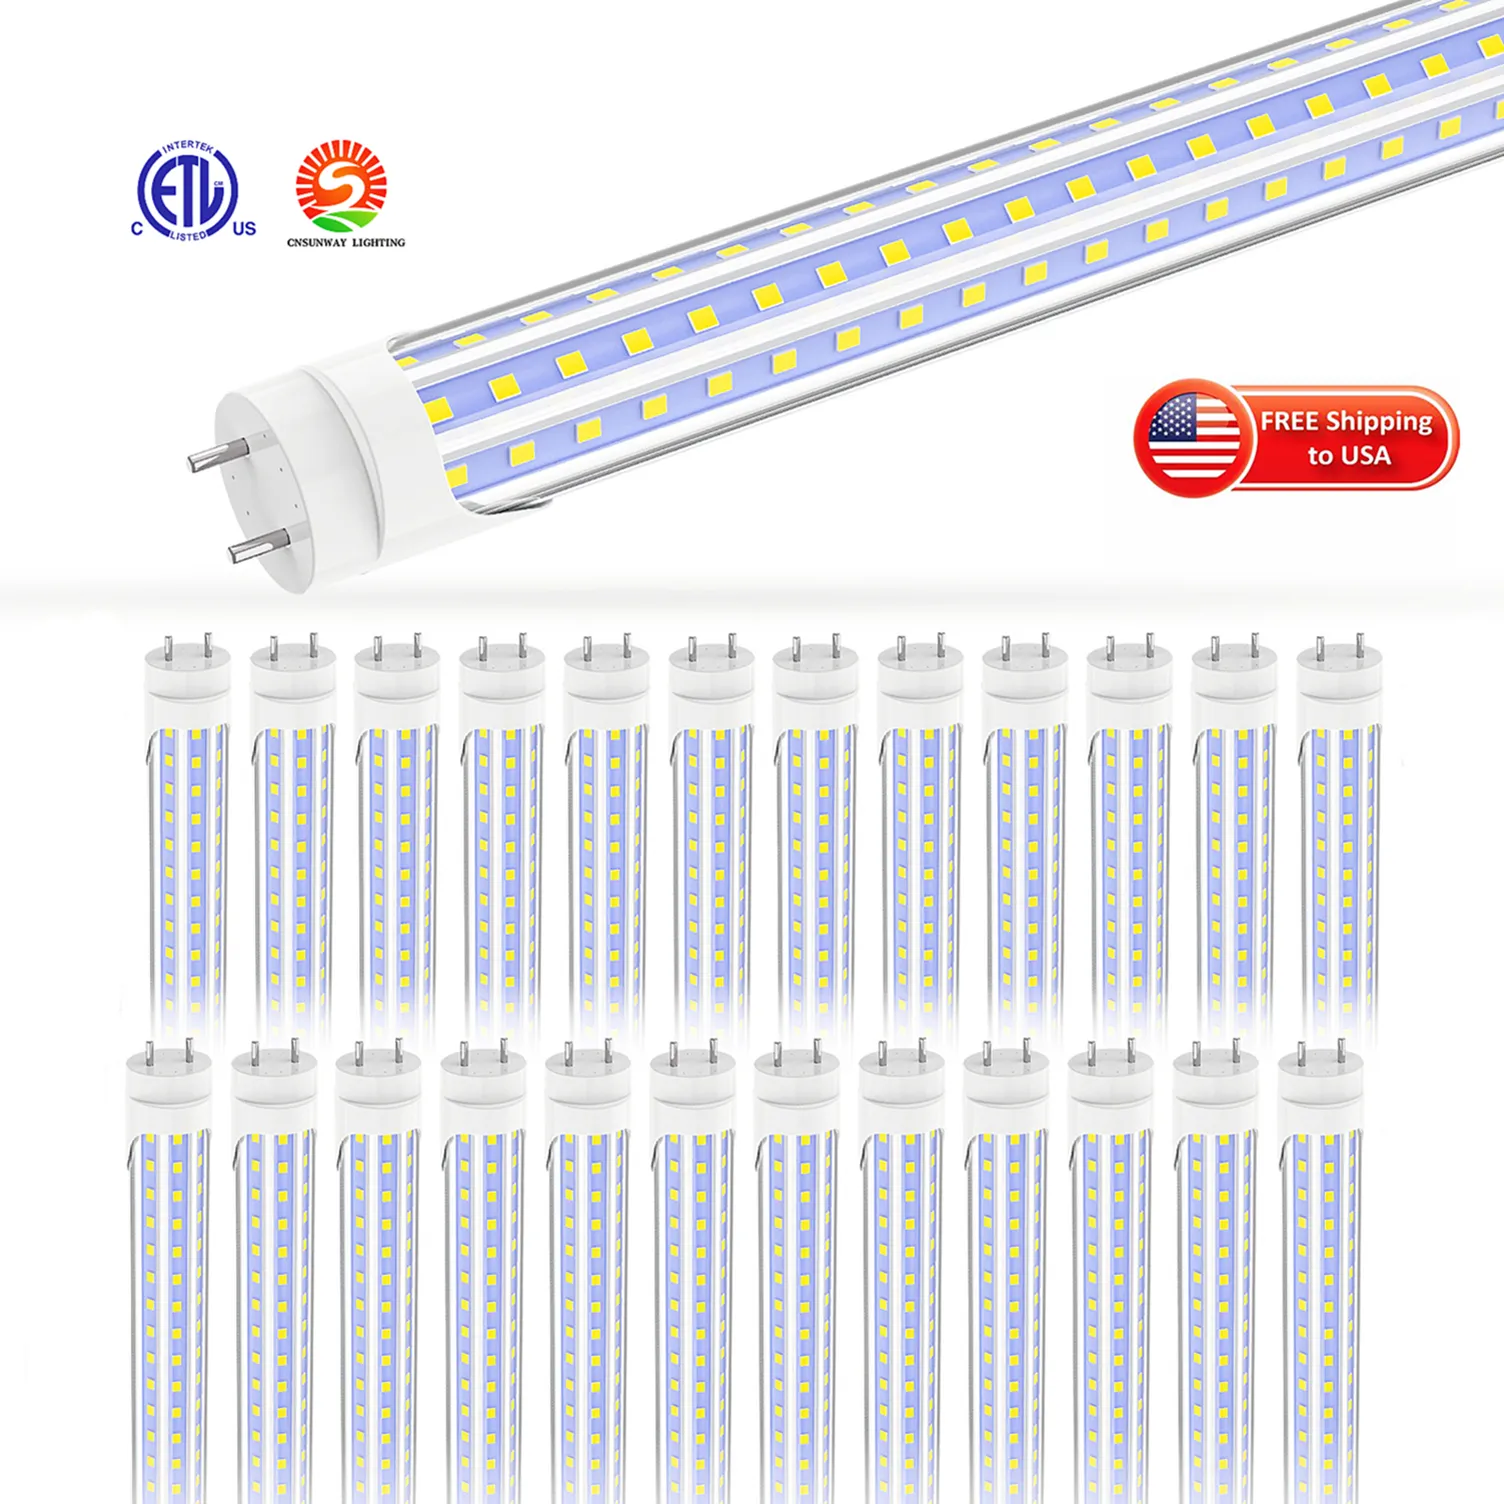 SHOPLED T8 LED Tube Light Bulbs 4FT 36W 60w 4680Lm 6000K Cold White Fluorescent Replacement Bi Pin G13 Dual-end shop light garage workshop ceiling wall